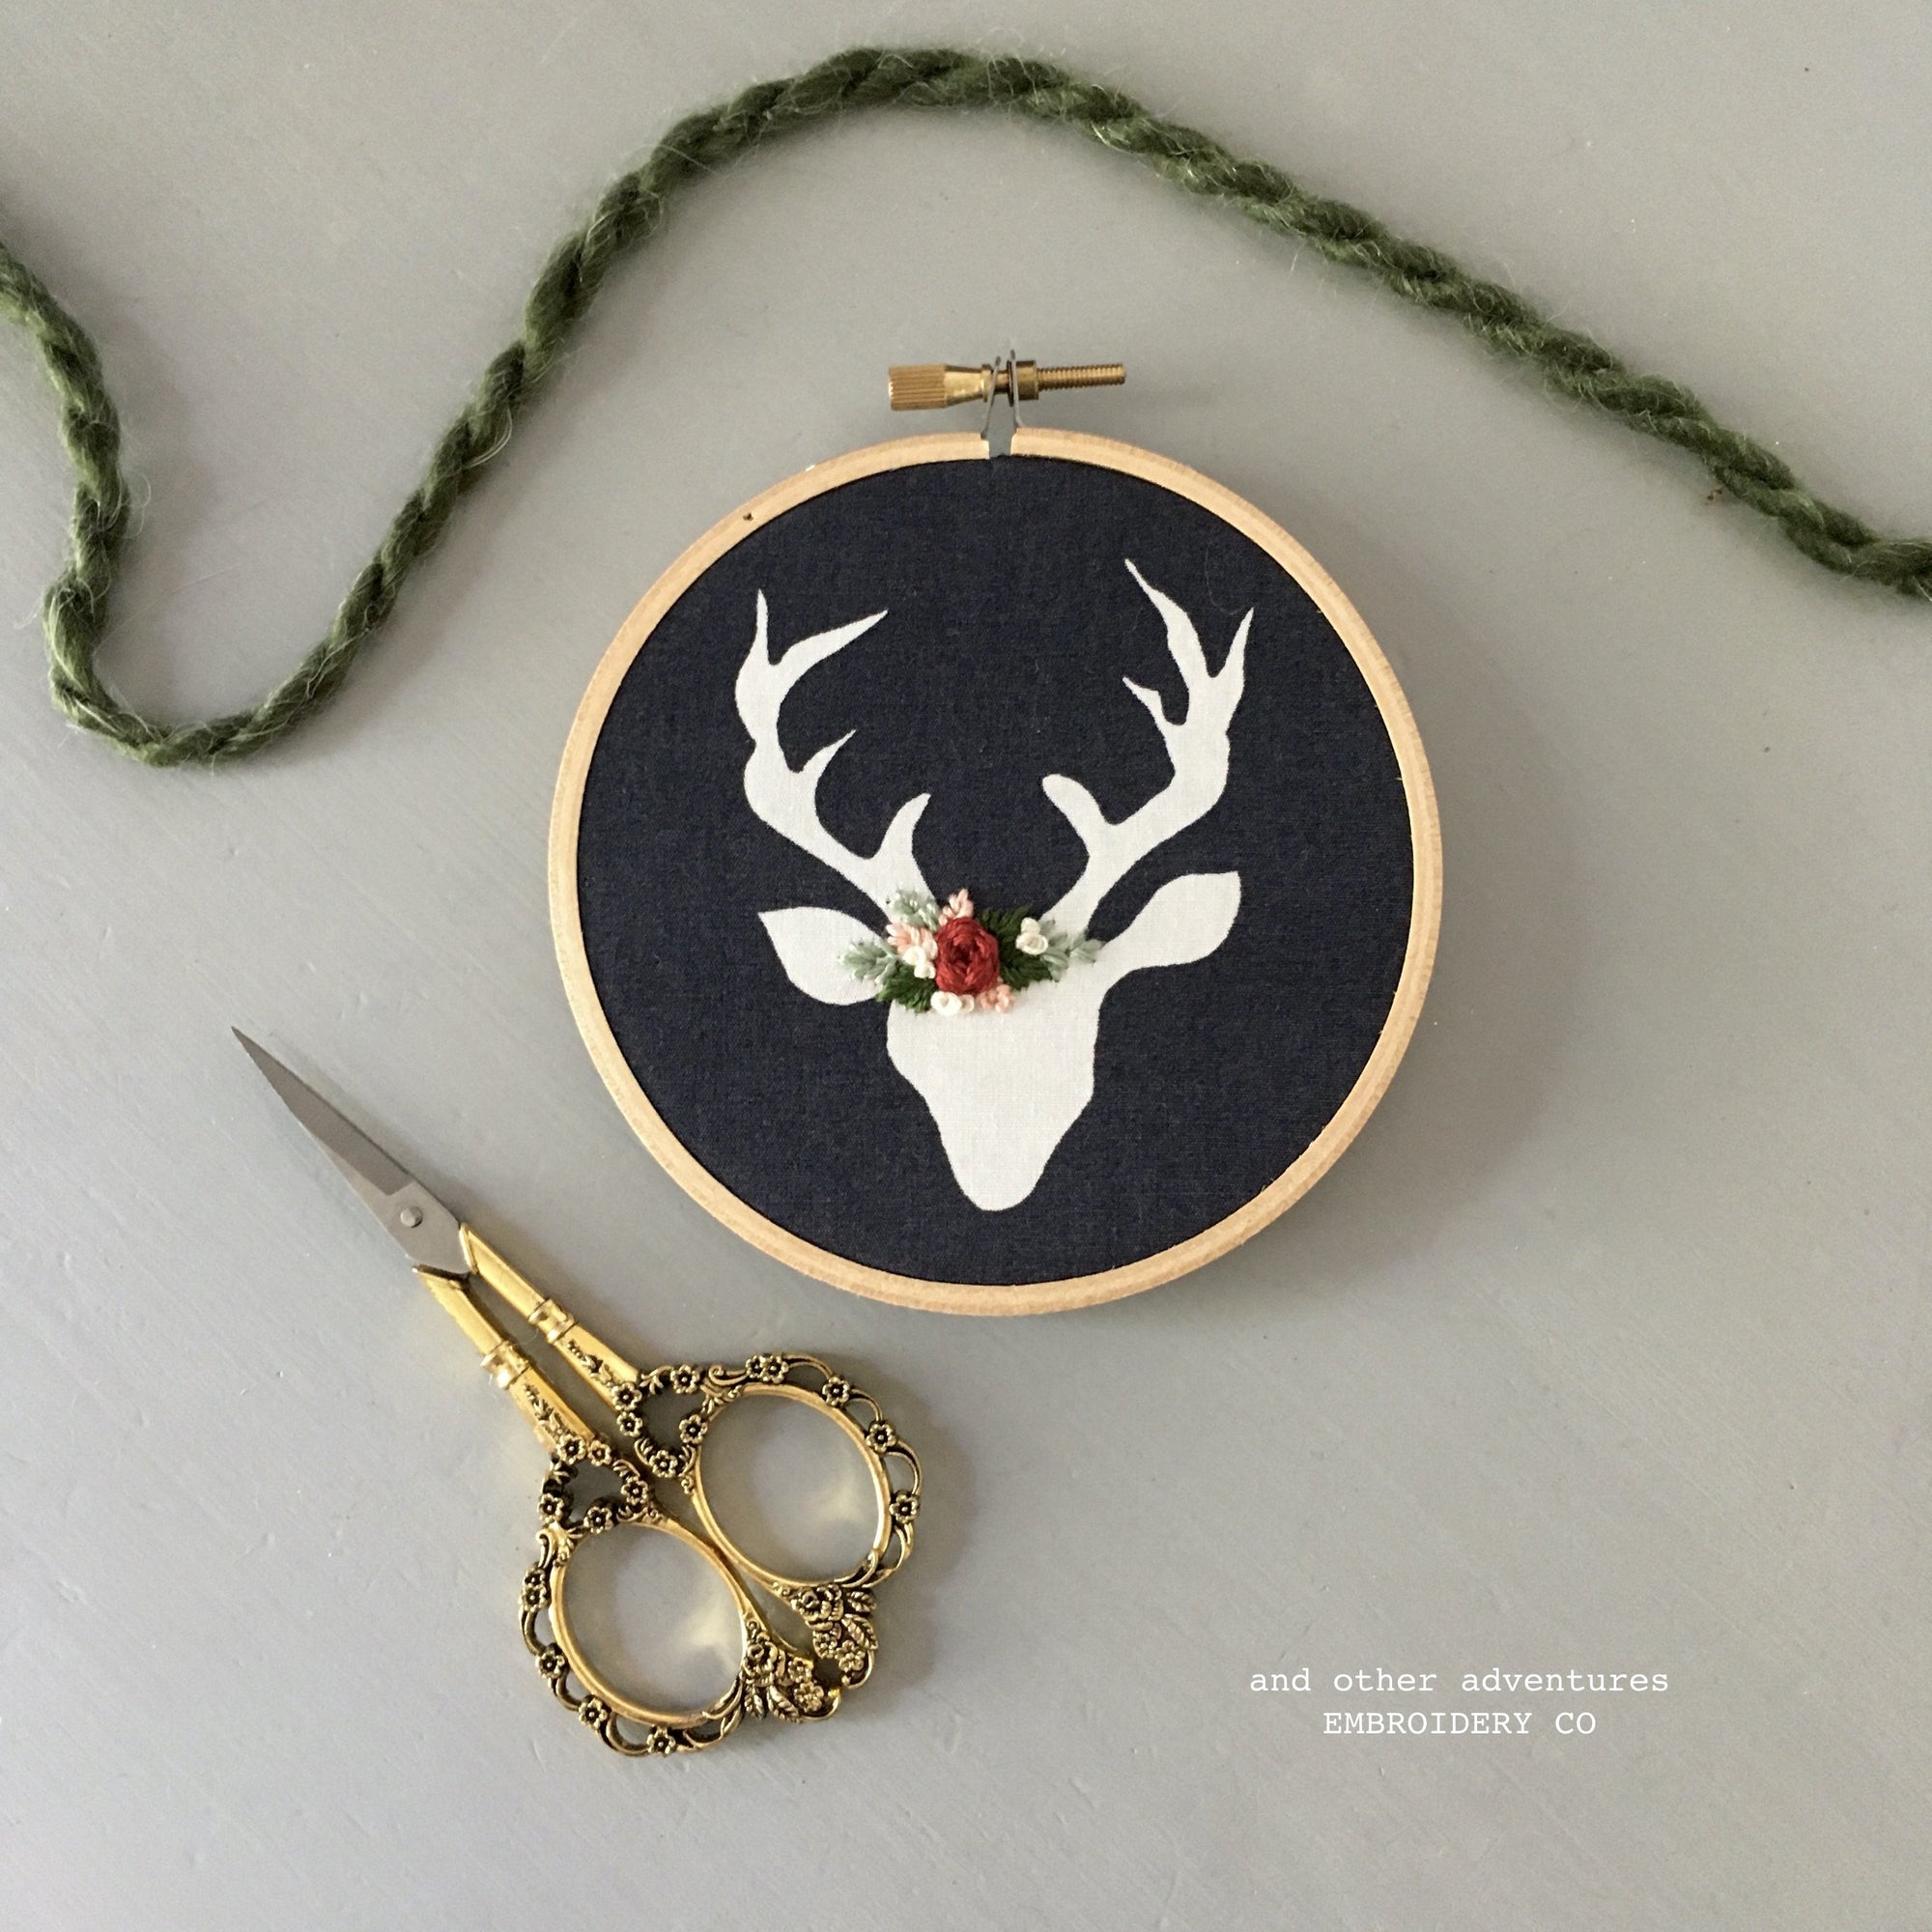 Hand Embroidered Deer Ornament by And Other Adventures Embroidery Co